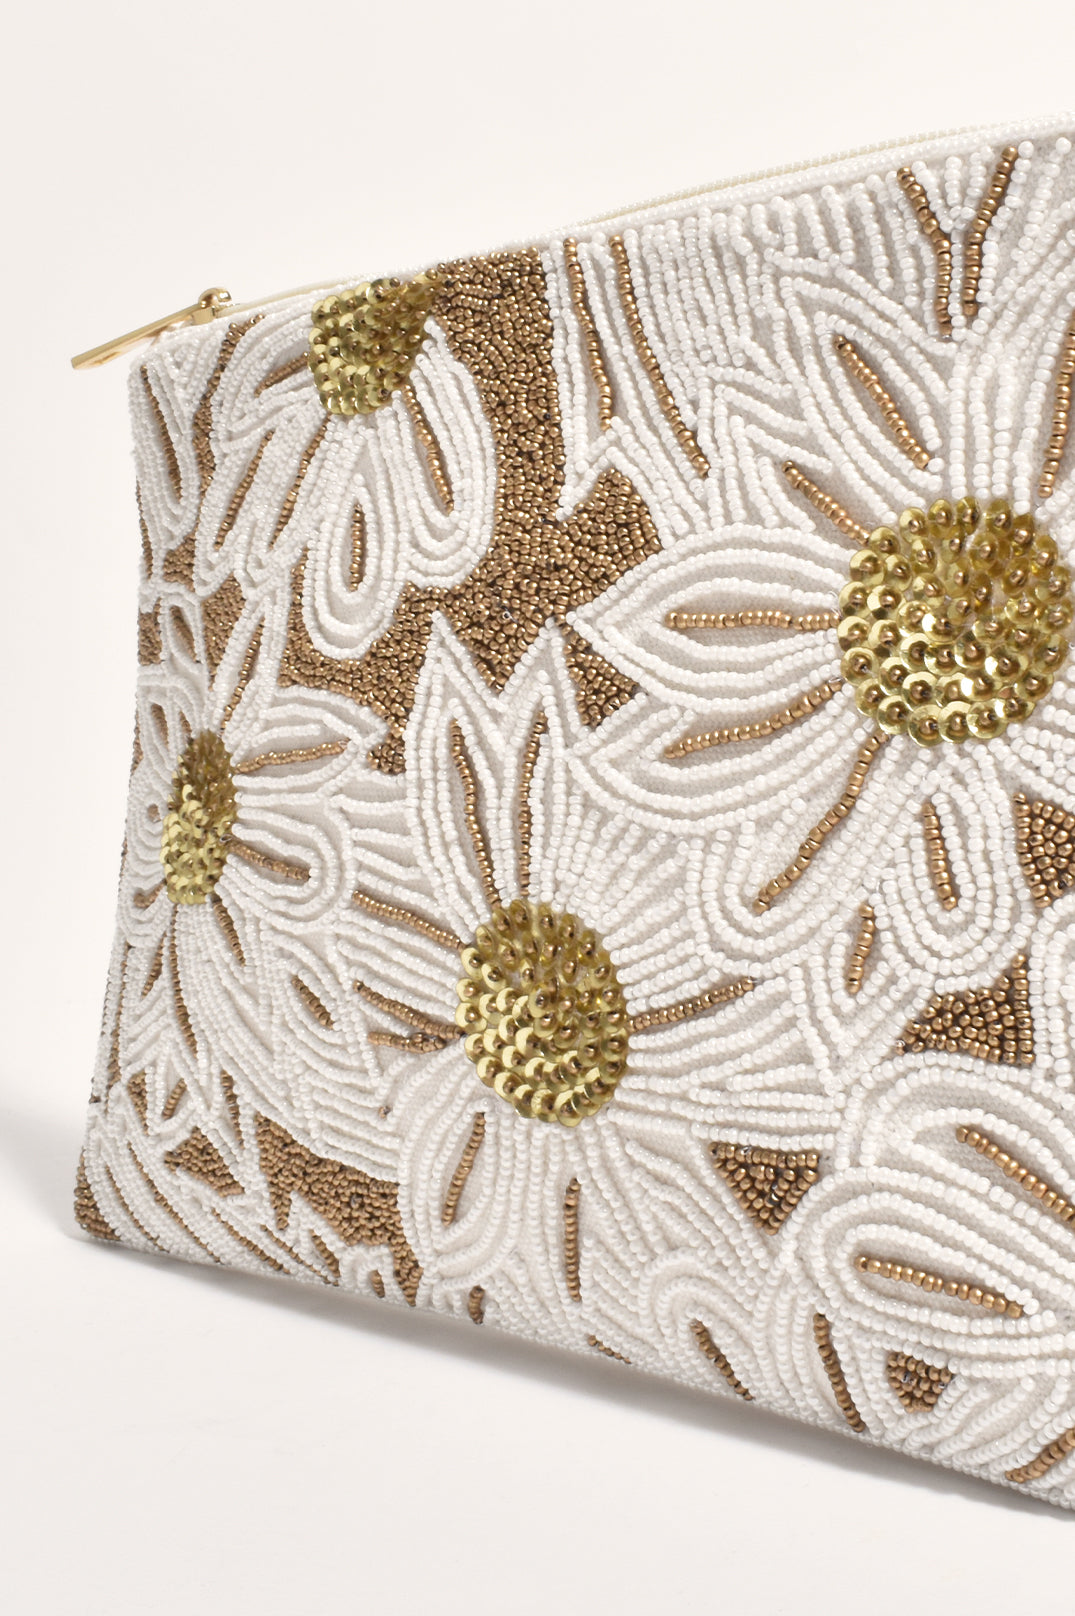 Adorne Bold Beaded Floral Clutch - White/Gold